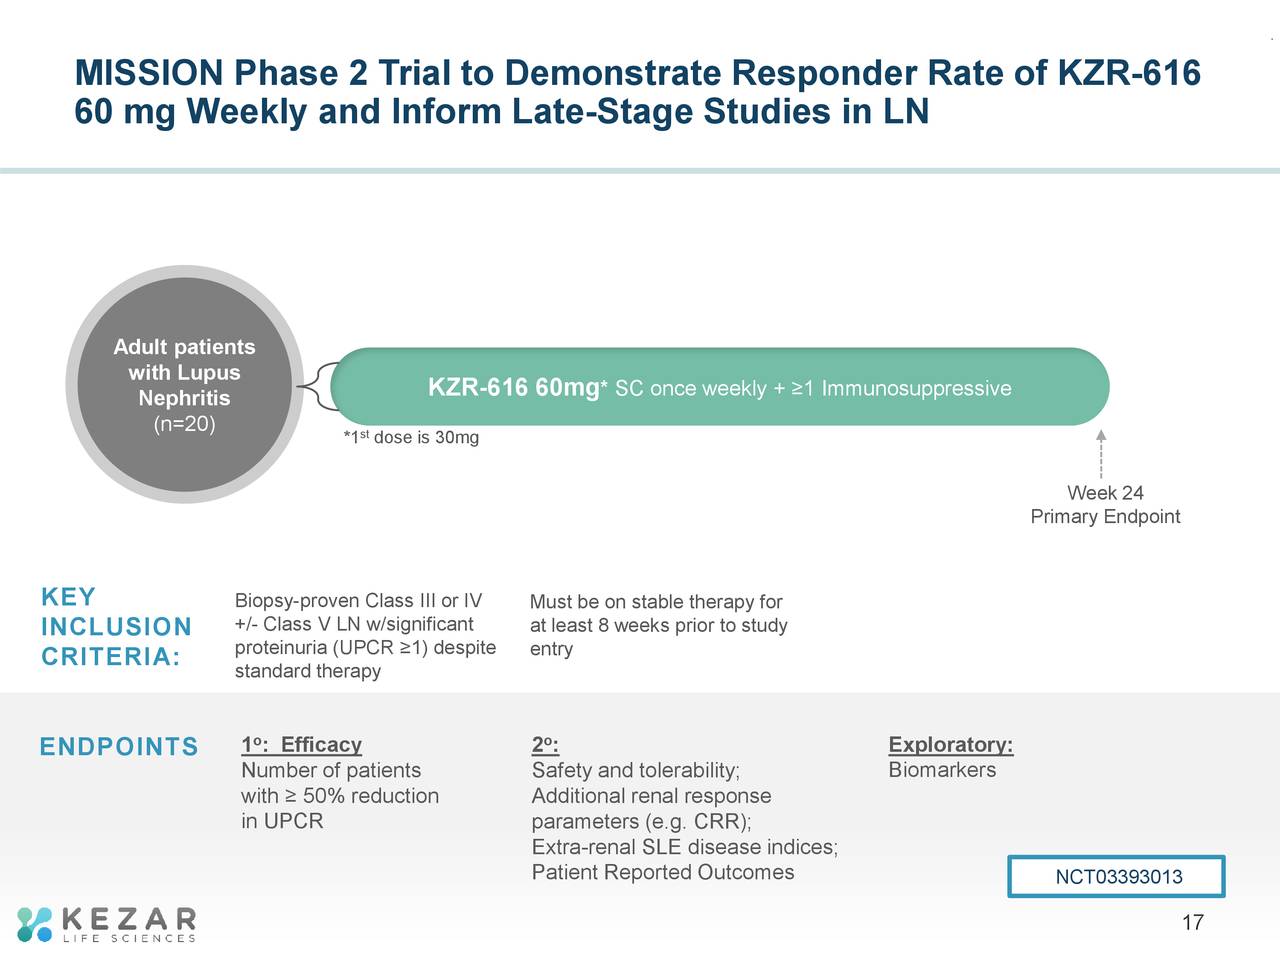 MISSION Phase 2 Trial to Demonstrate Responder Rate of KZR-616